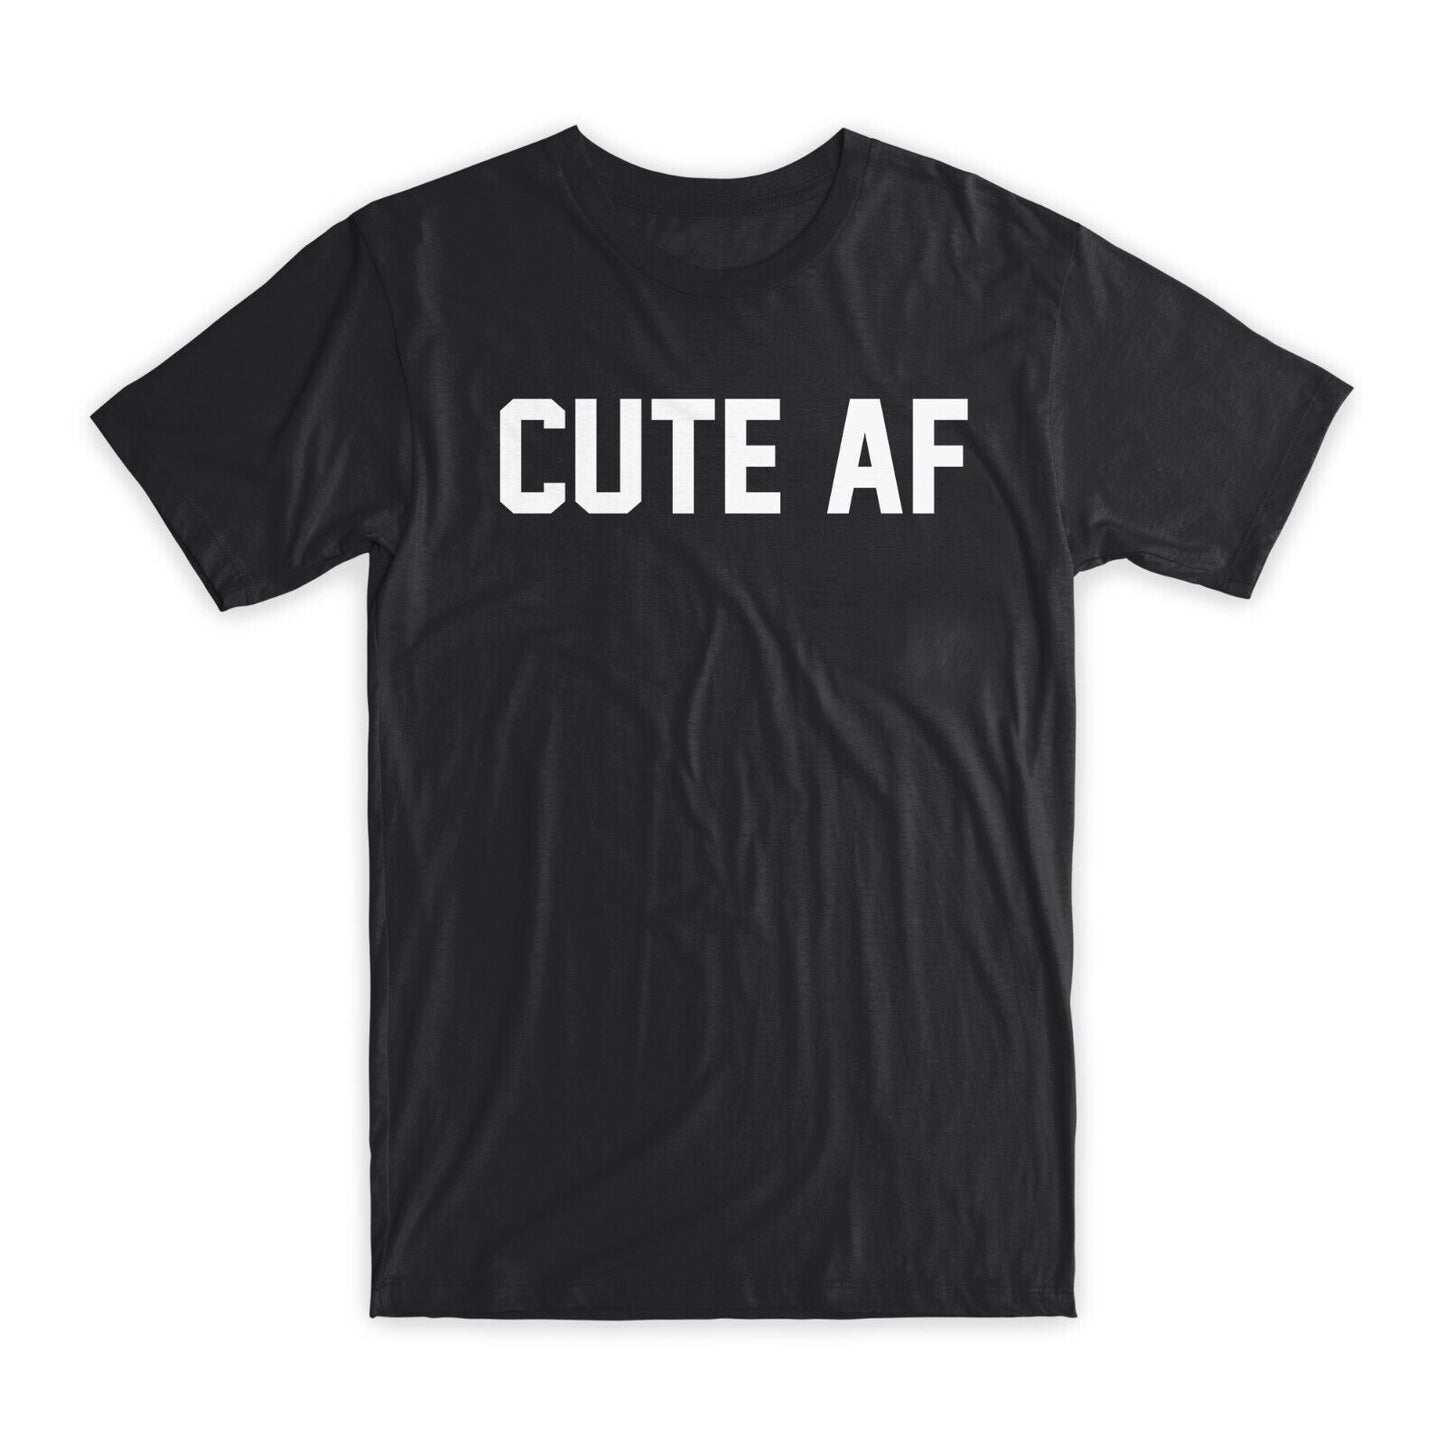 Cute AF Printed T-Shirt Premium Soft Cotton Crew Neck Funny Tee Novelty Gift NEW